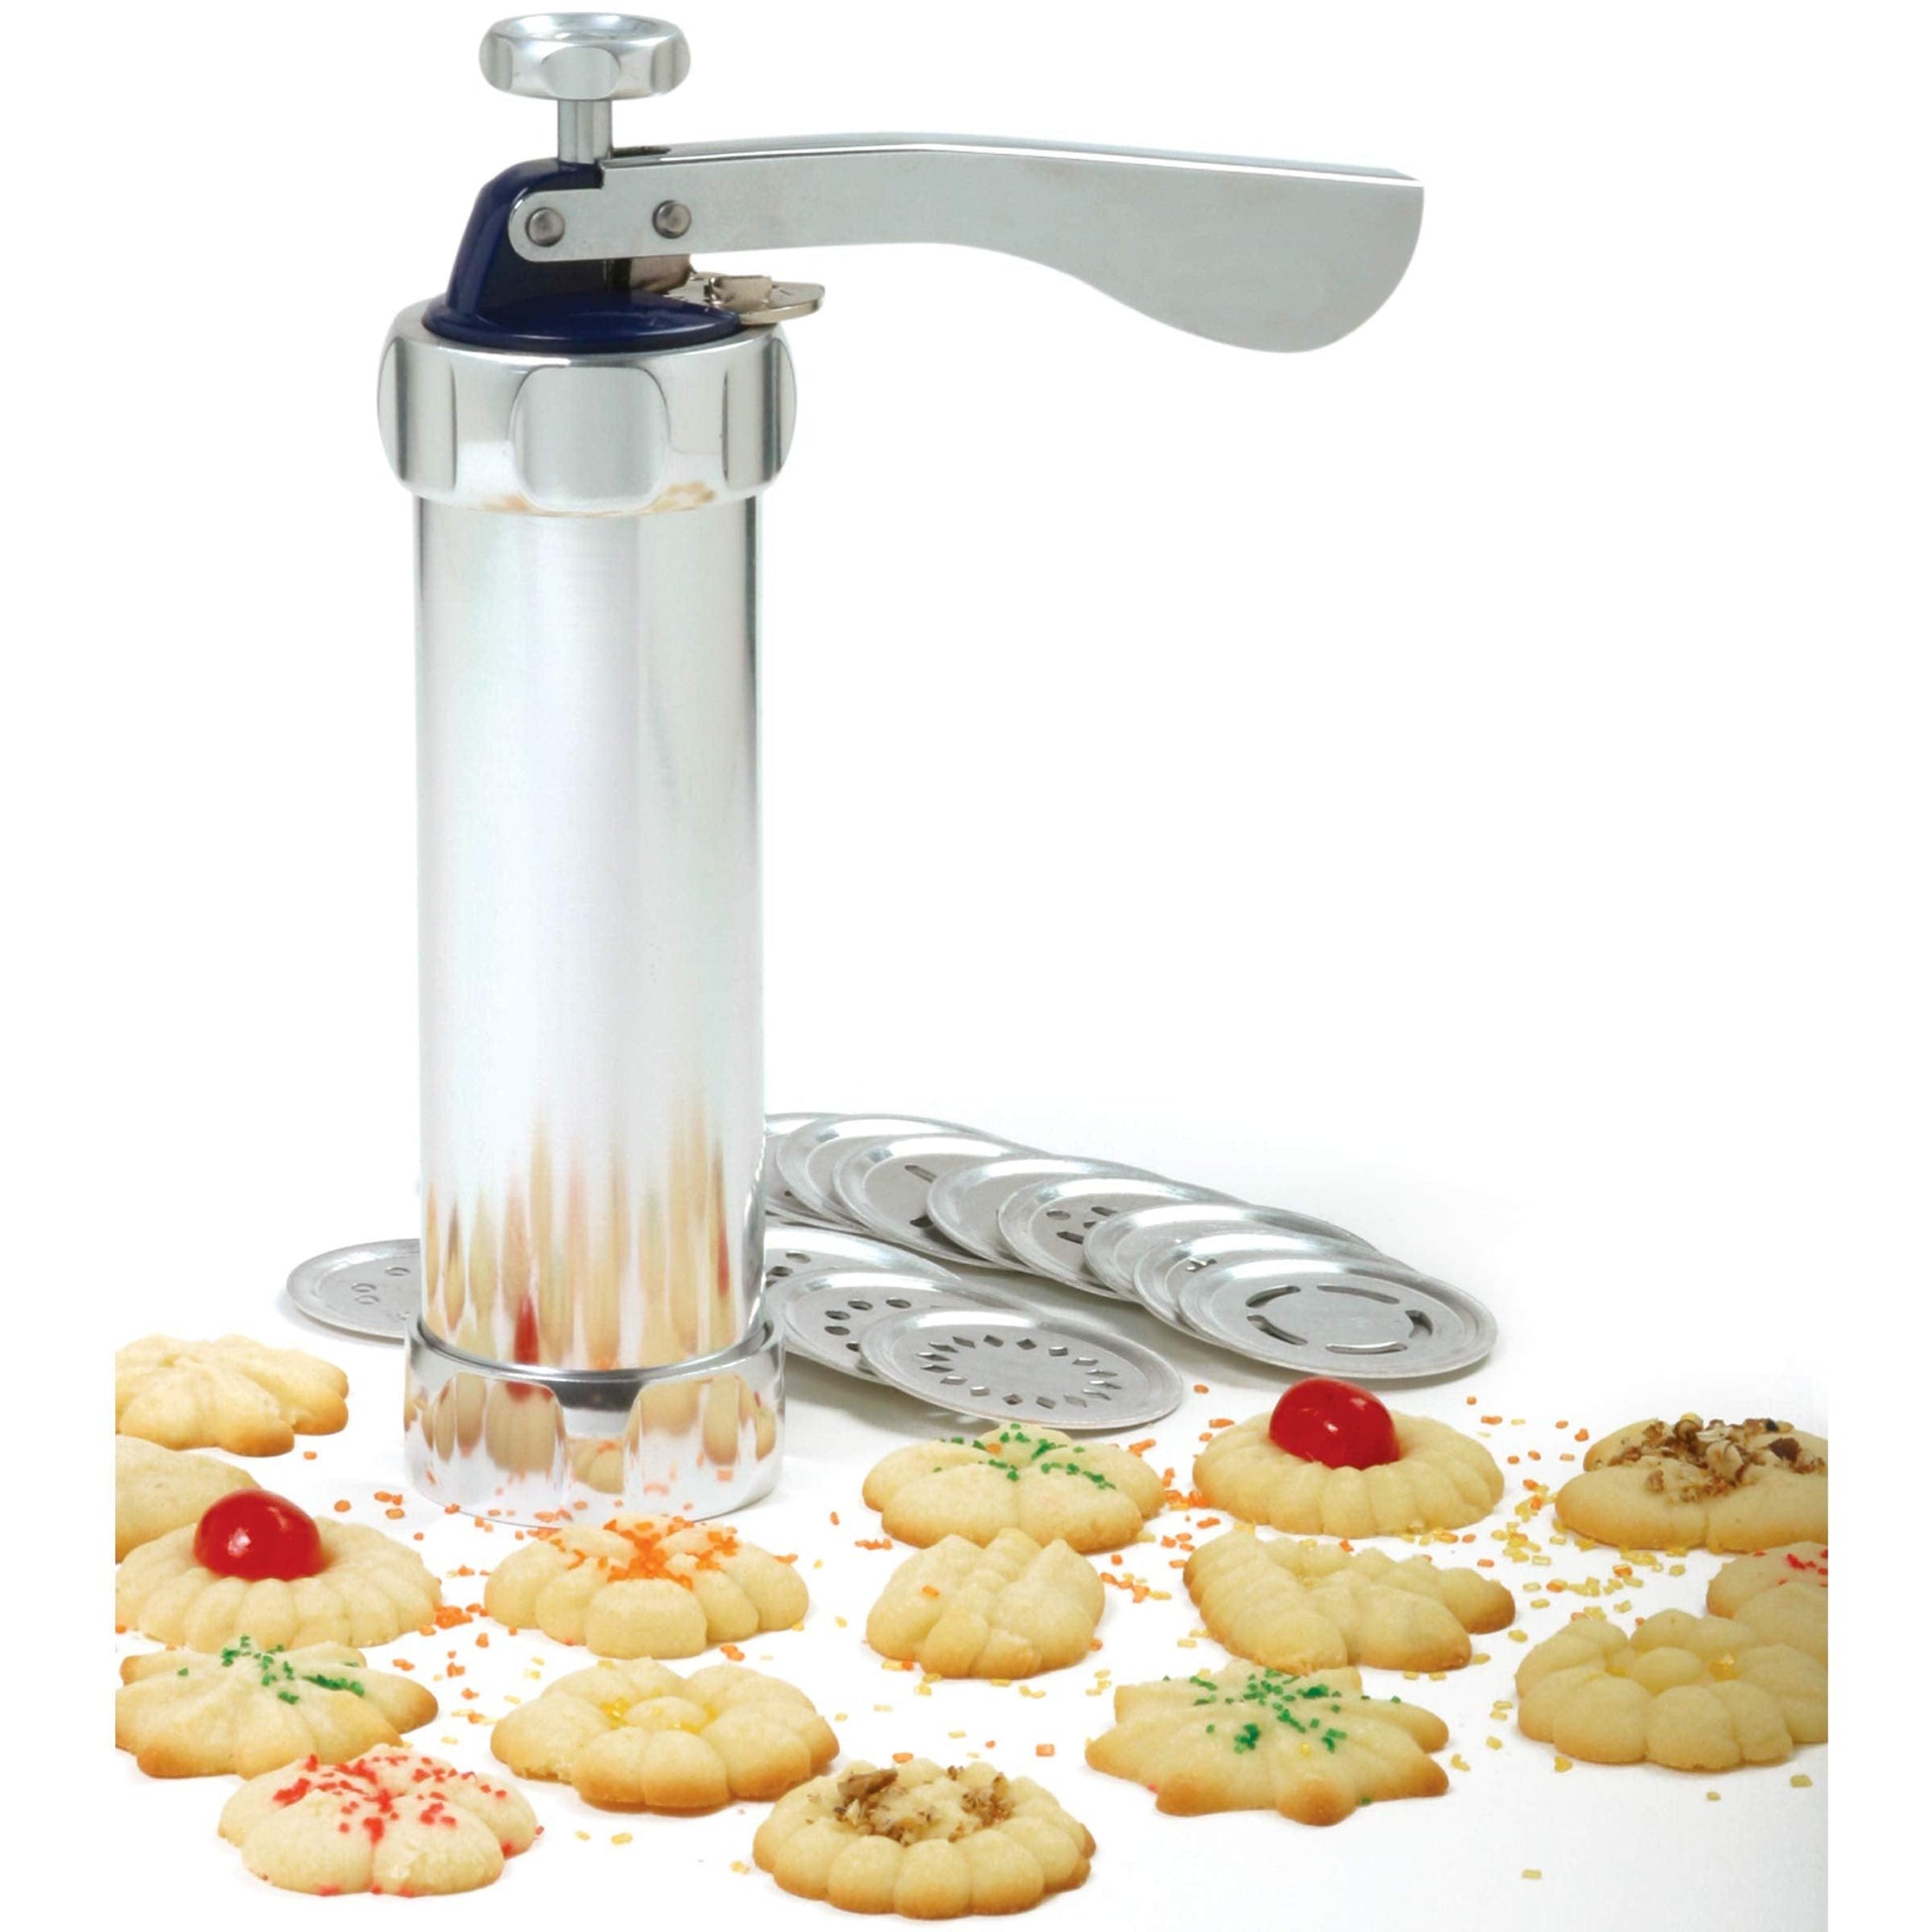 Norpro Deluxe Cookie Press with Icing Gun, 8.5in/21.5cm and holds 1.25c/10oz - CookCave